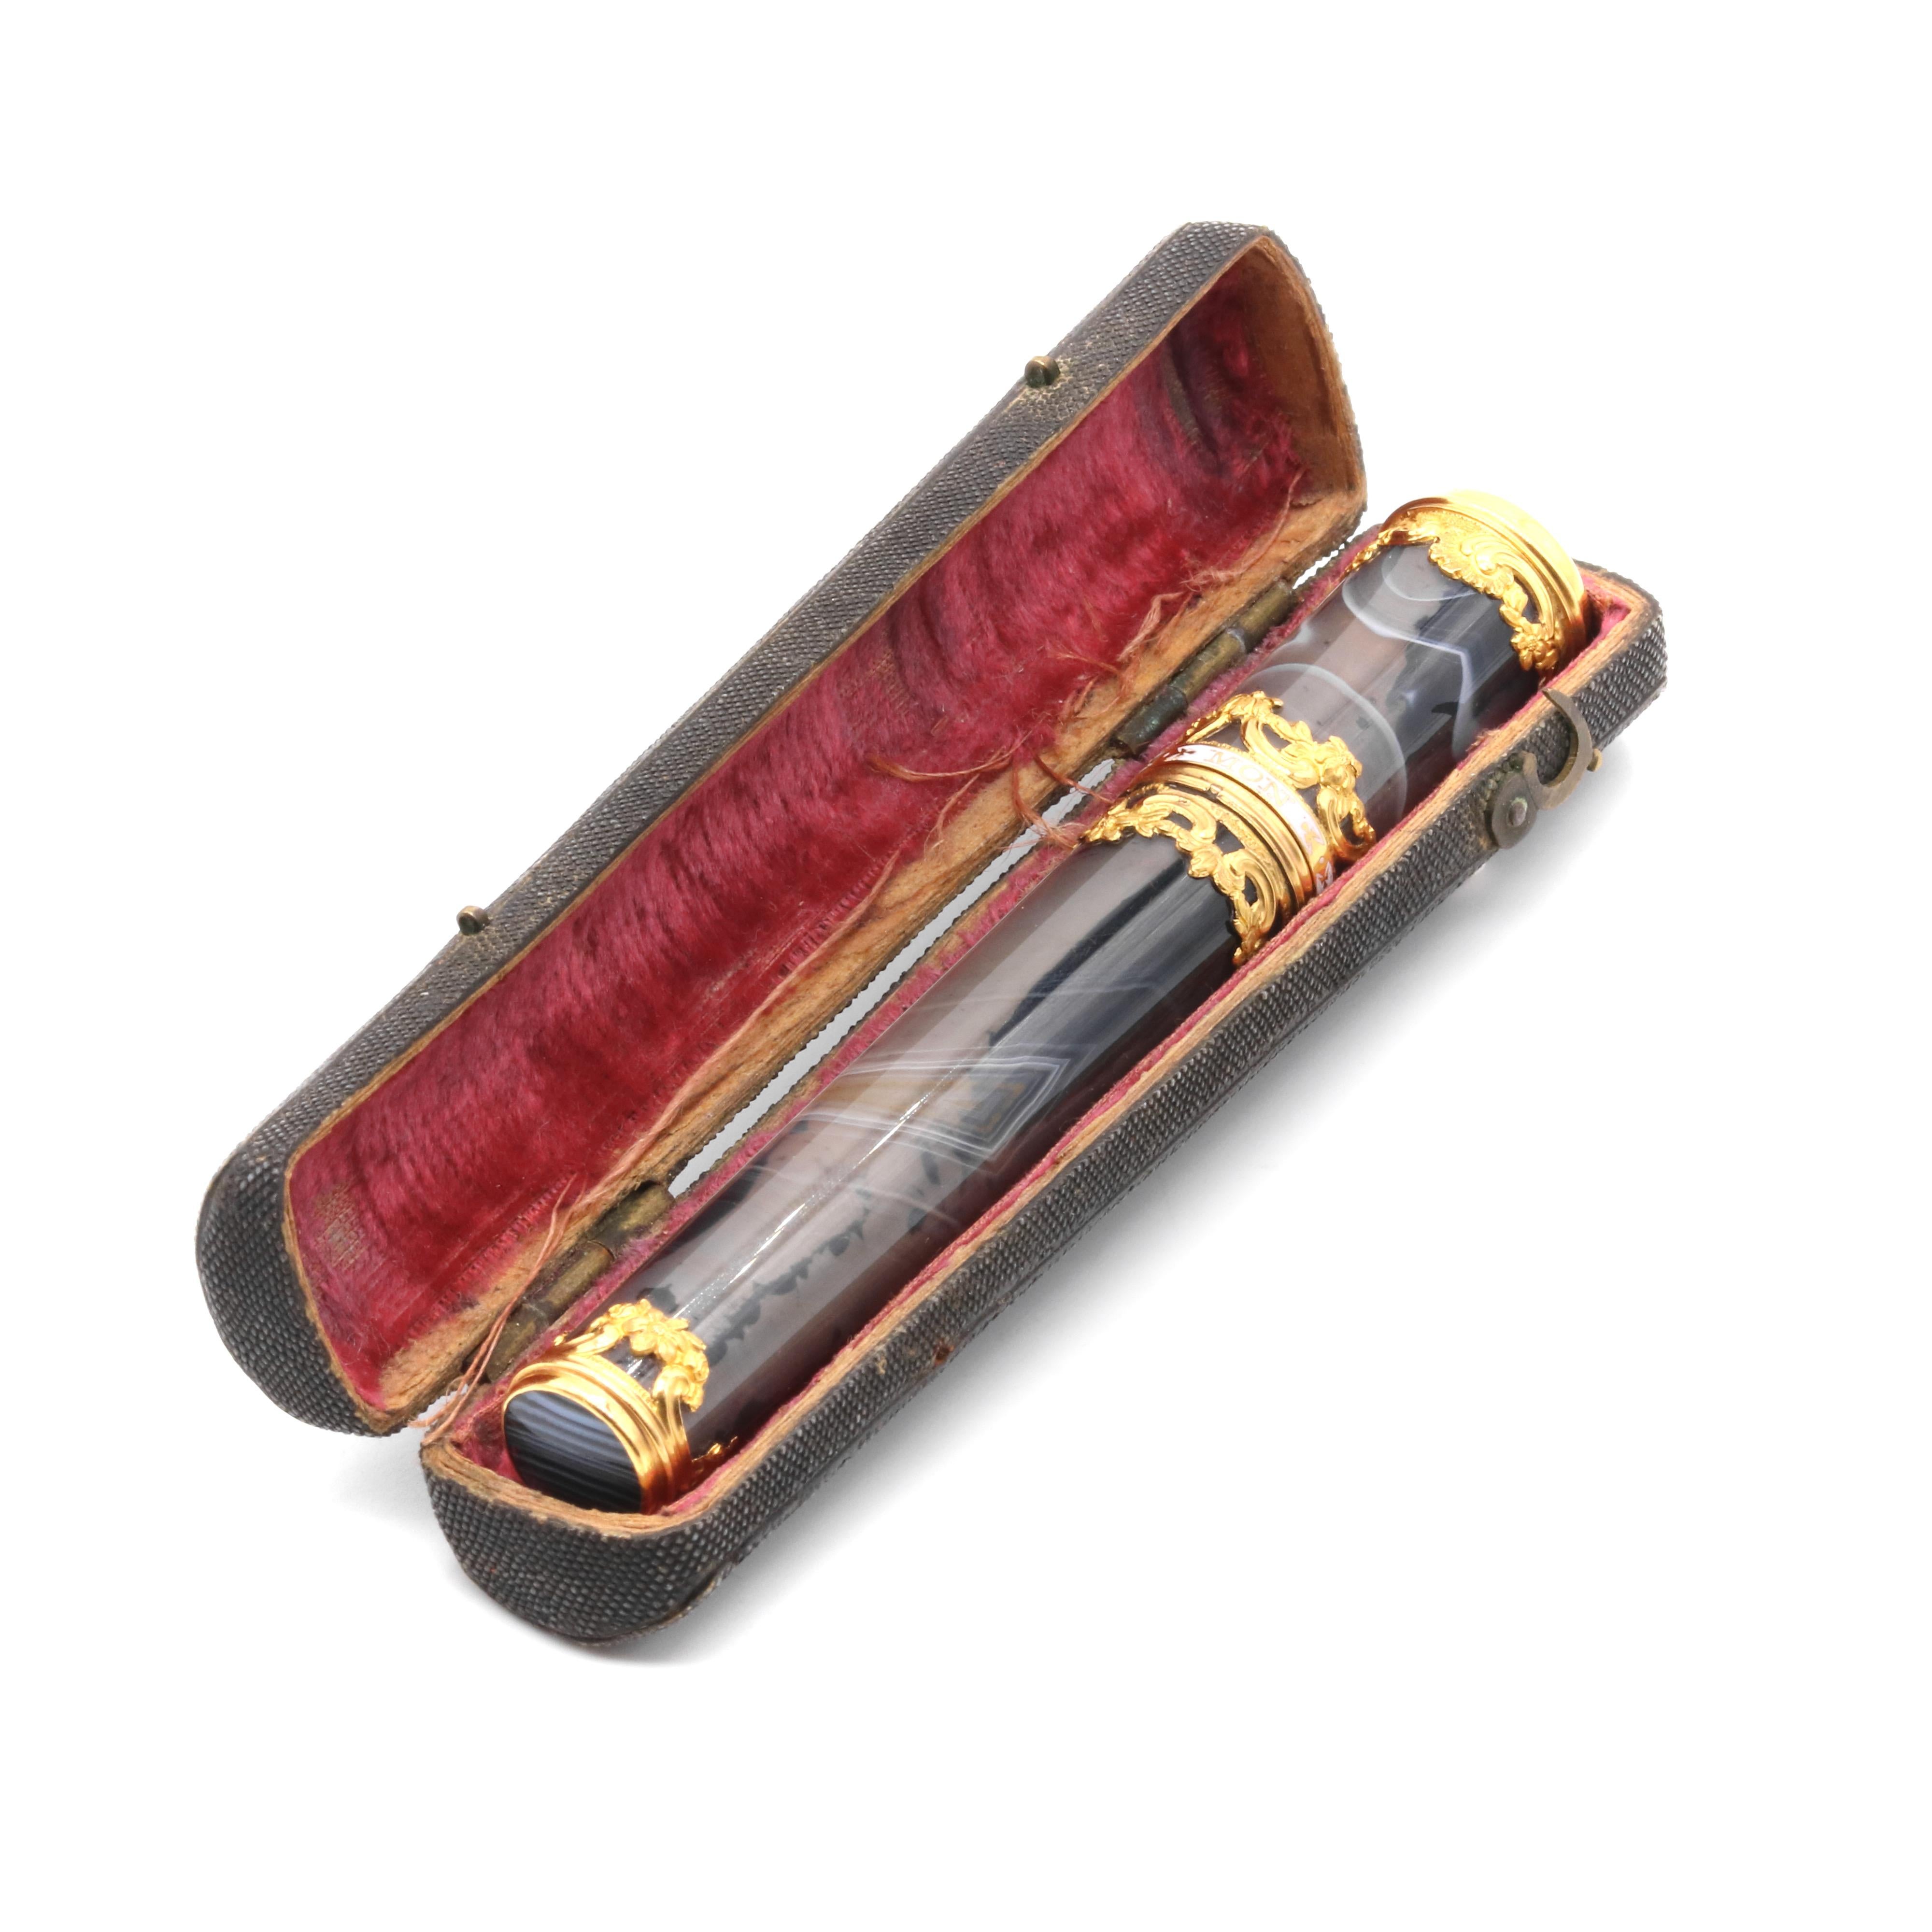 A Georgian gold, enamel and agate needle case or etui, comprising a needle case in polished grey agate, with an inscription in white enamel, with floral detailing in 18 karat yellow gold. 

This striking Georgian etui is truly beautiful to behold